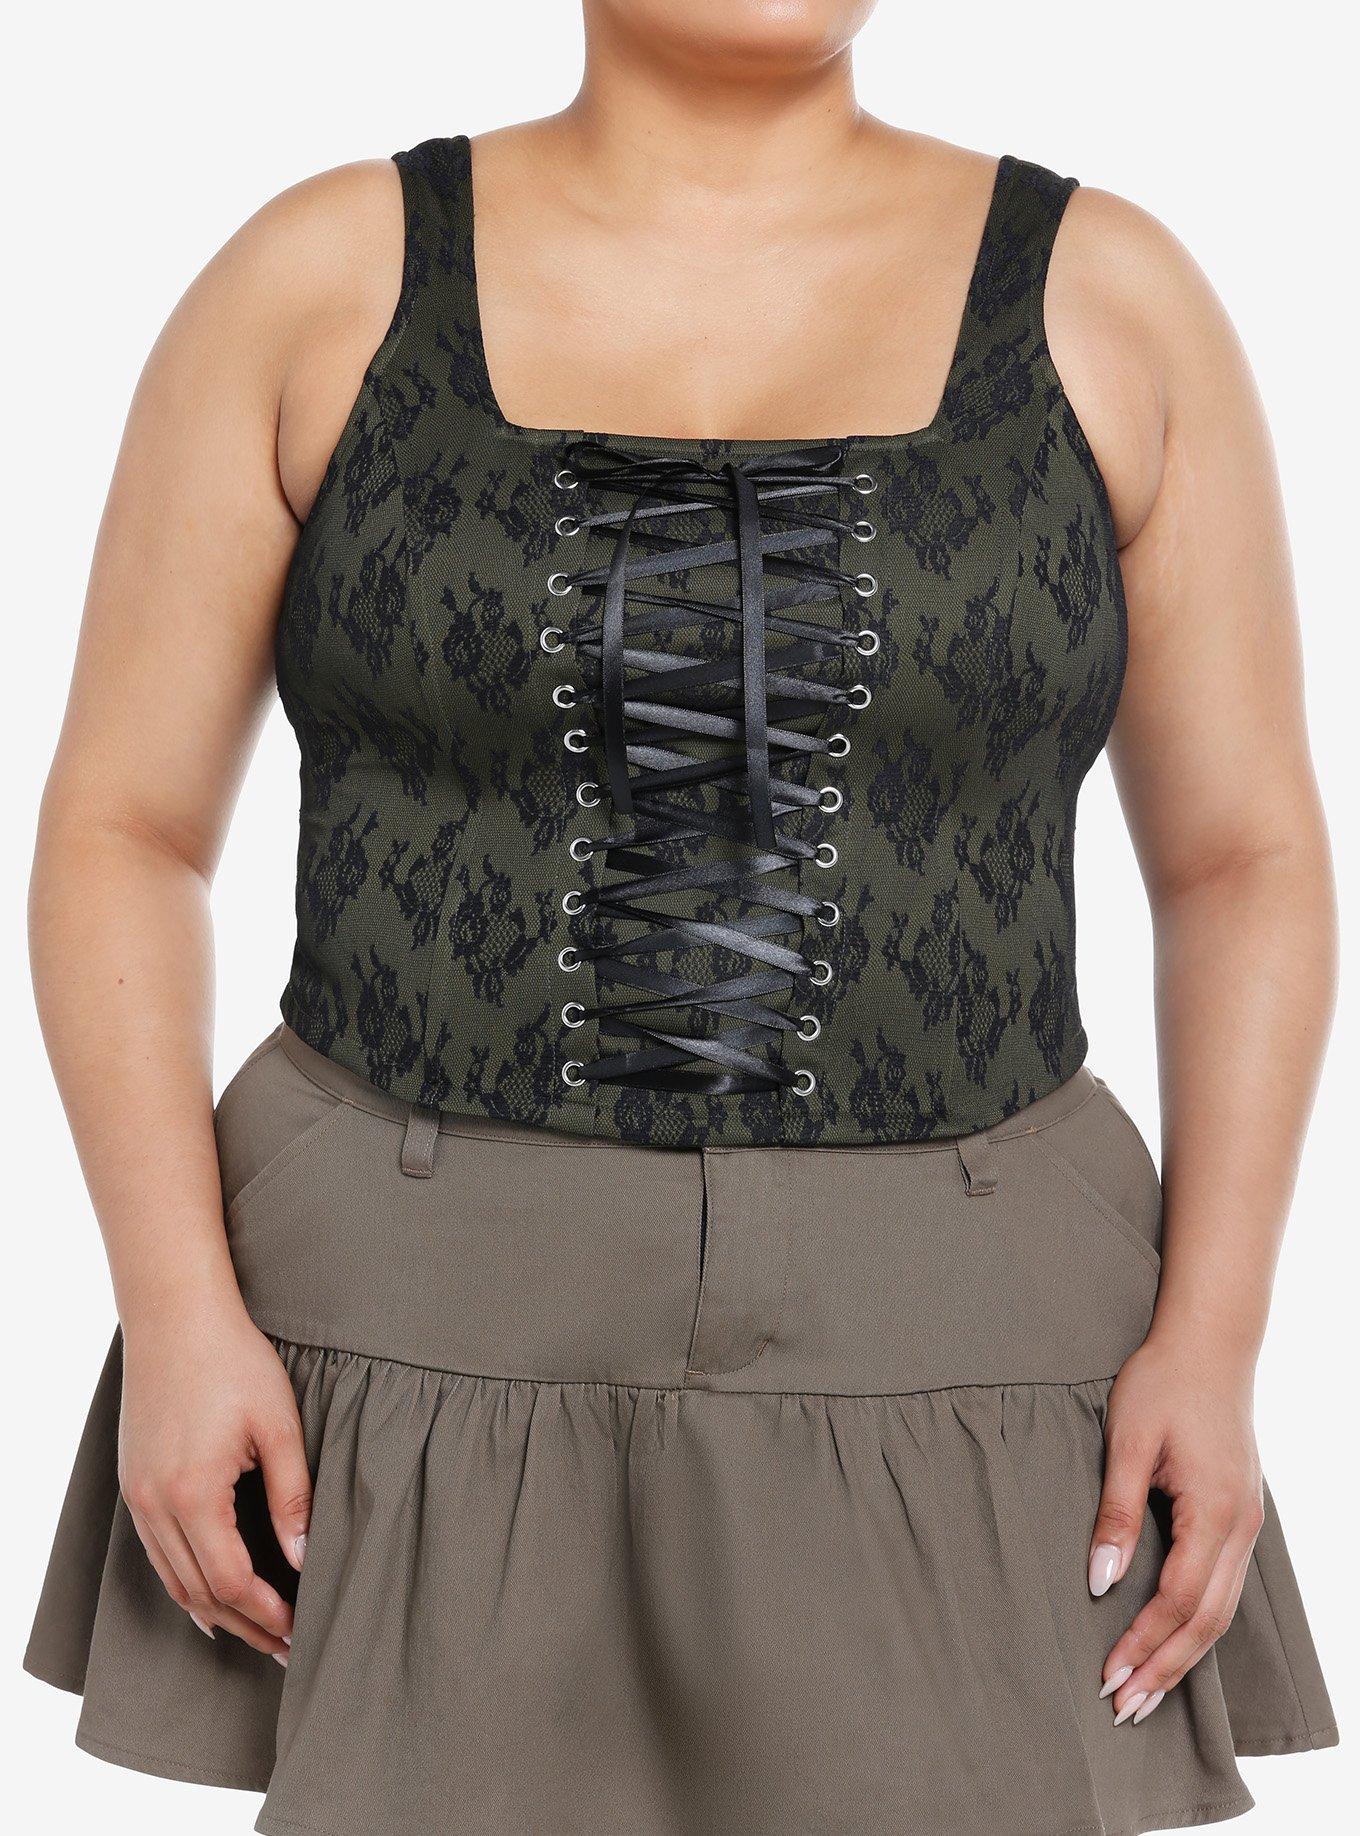 Thorn & Fable Green & Black Lace Girls Corset Top Plus Size, BLACK, hi-res